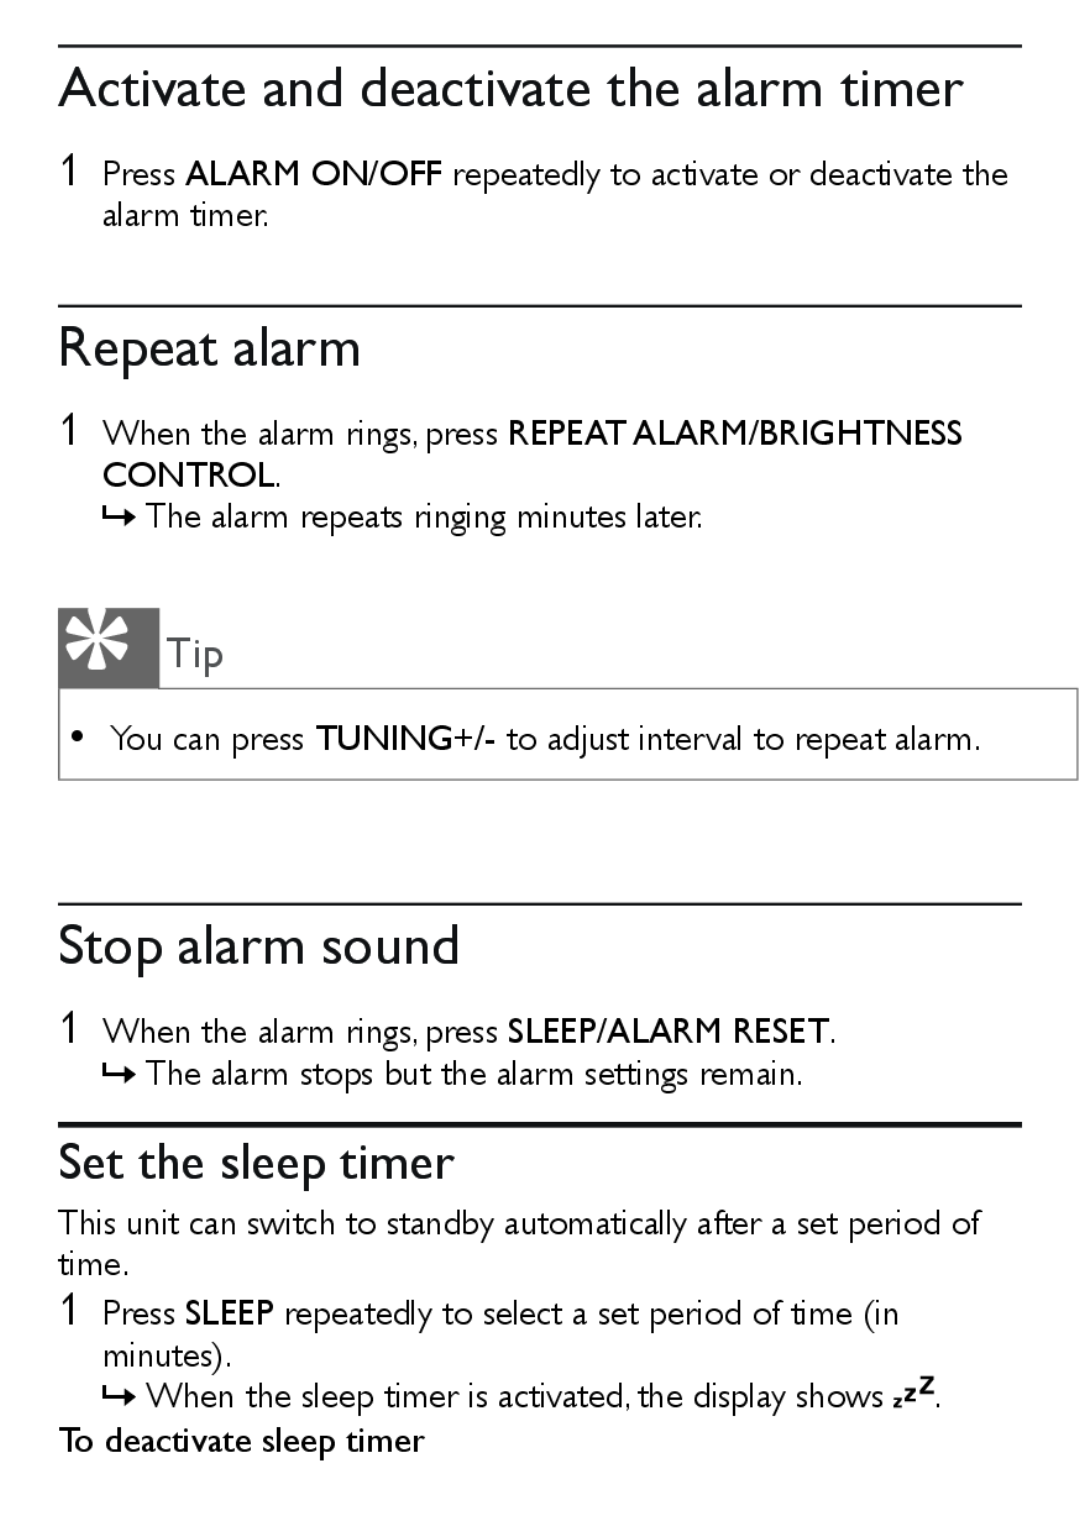 Philips AJ3551 user manual Activate and deactivate the alarm timer, Repeat alarm, Stop alarm sound, Set the sleep timer 